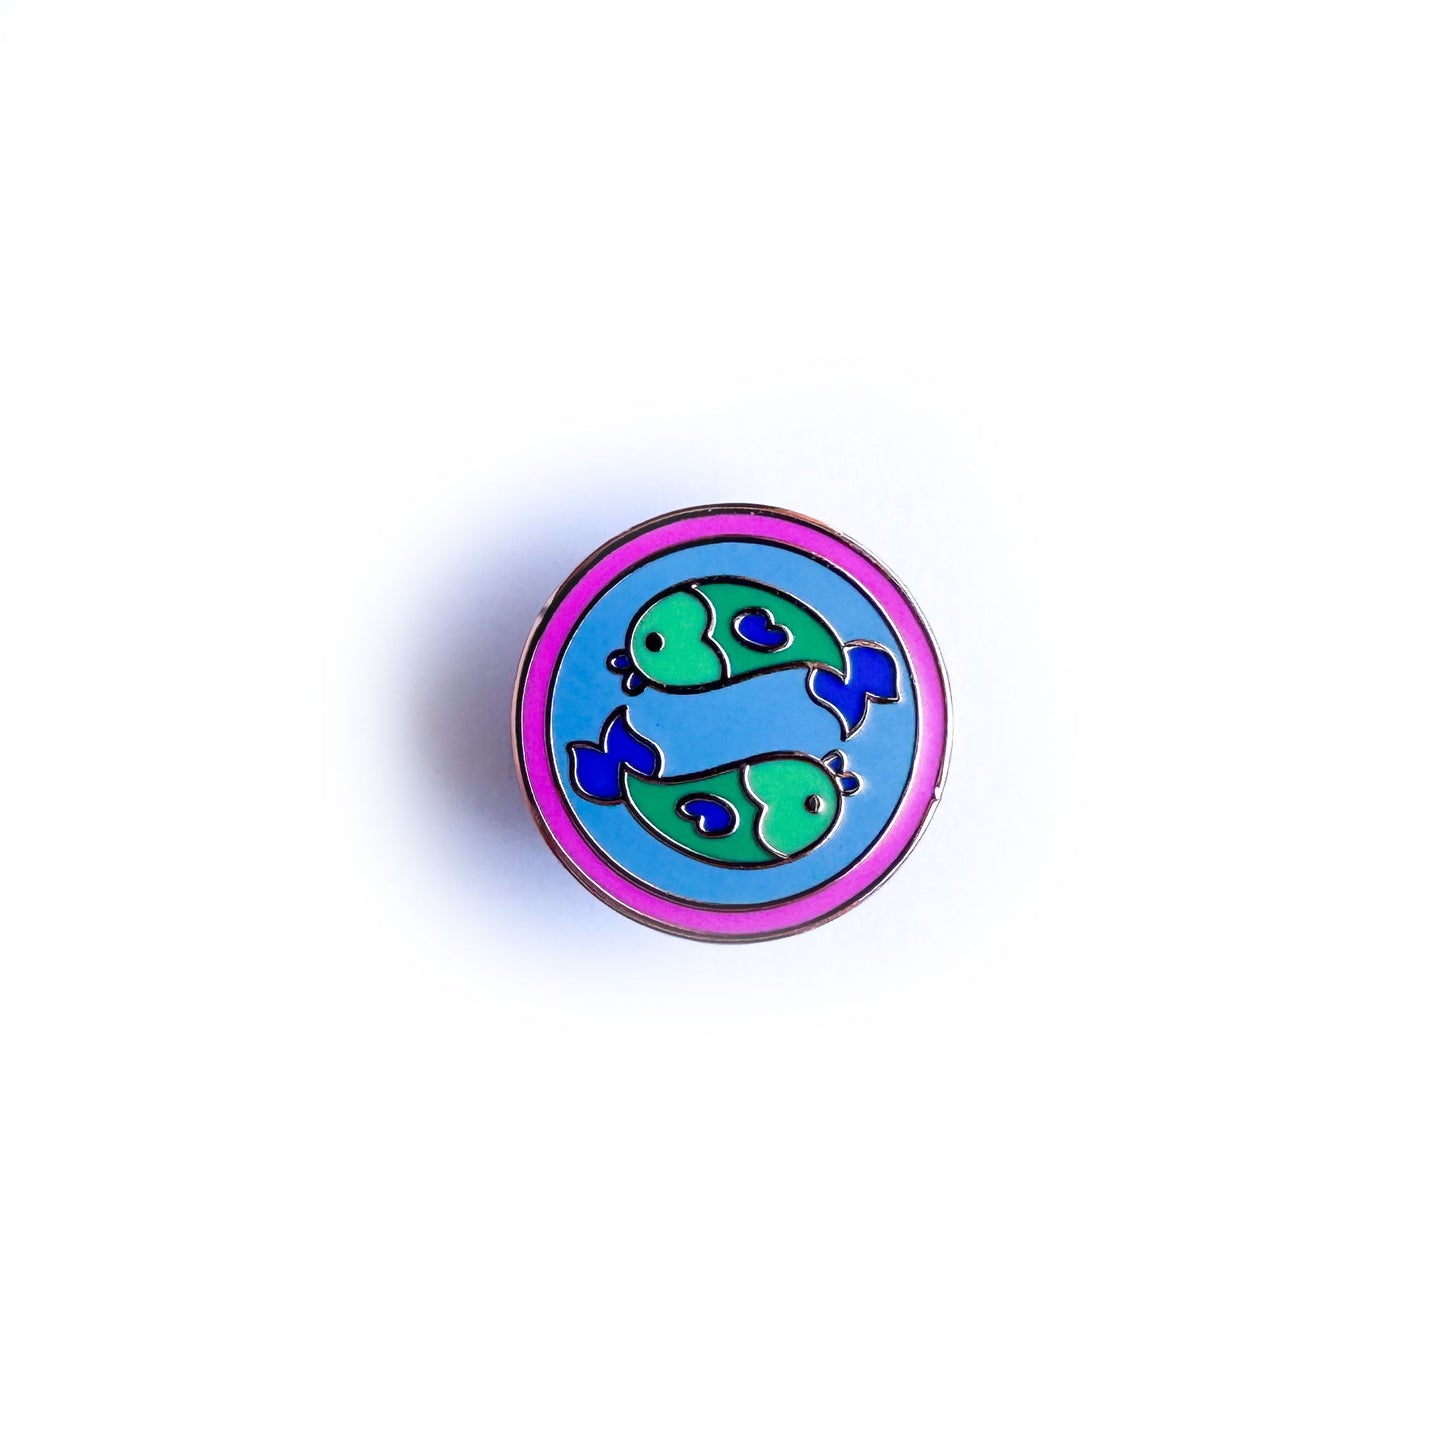 A pin of a blue circle with a border of a hot pink circle with two green fish swimming in opposite directions on the blue circle to represent the zodiac symbol of Pisces. 